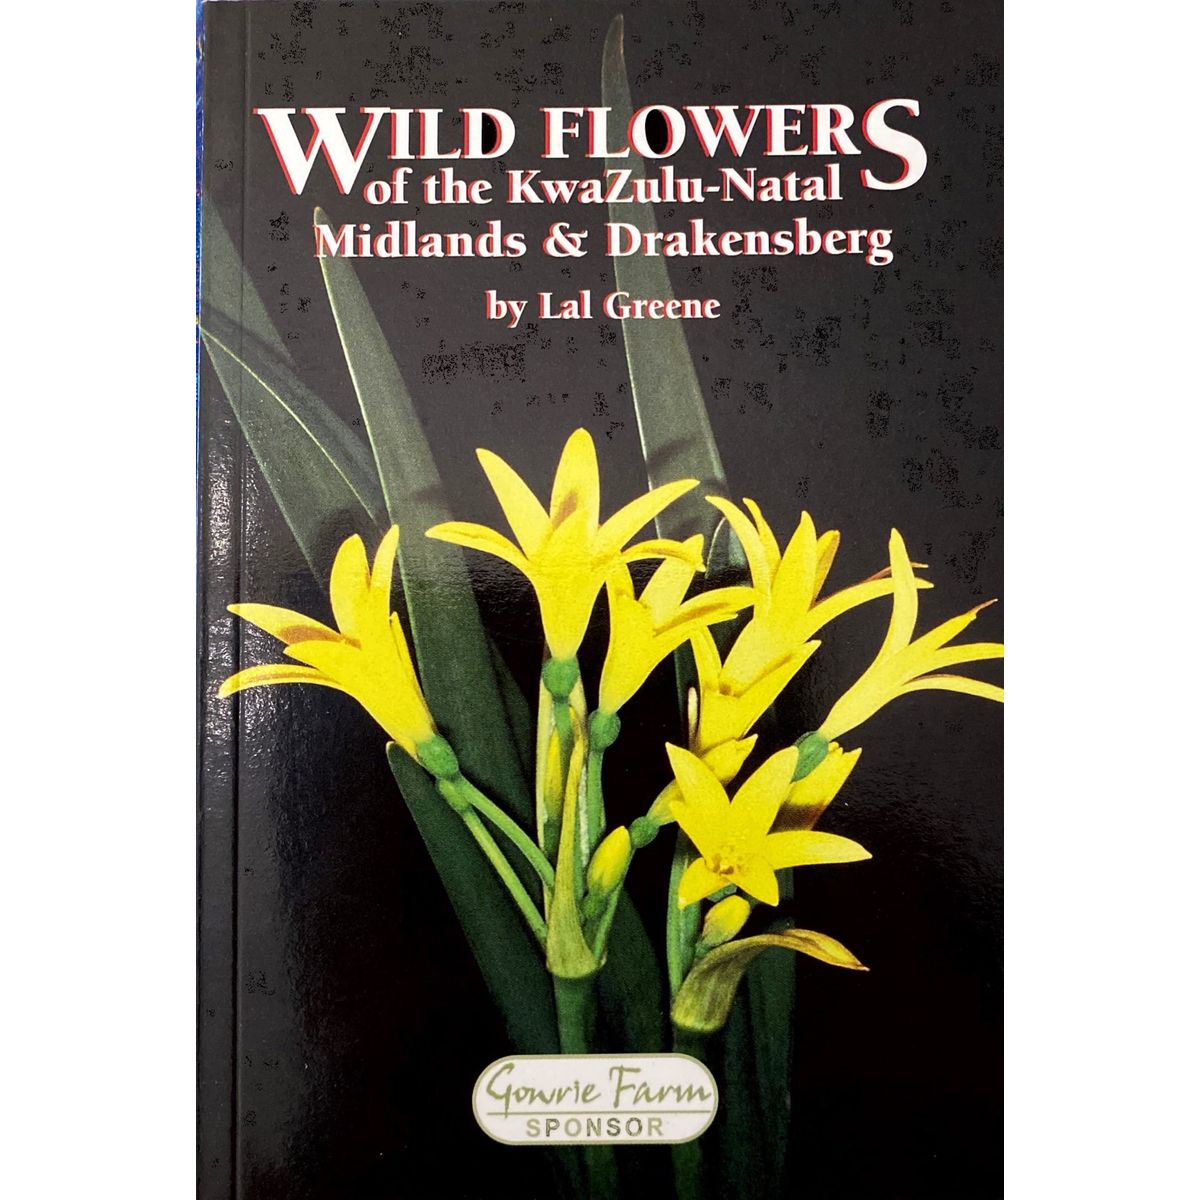 ISBN: 9780947008543 / 0947008543 - Wild Flowers of the KwaZulu-Natal Midlands & Drakensberg by Lal Green, 1st Edition [2008]